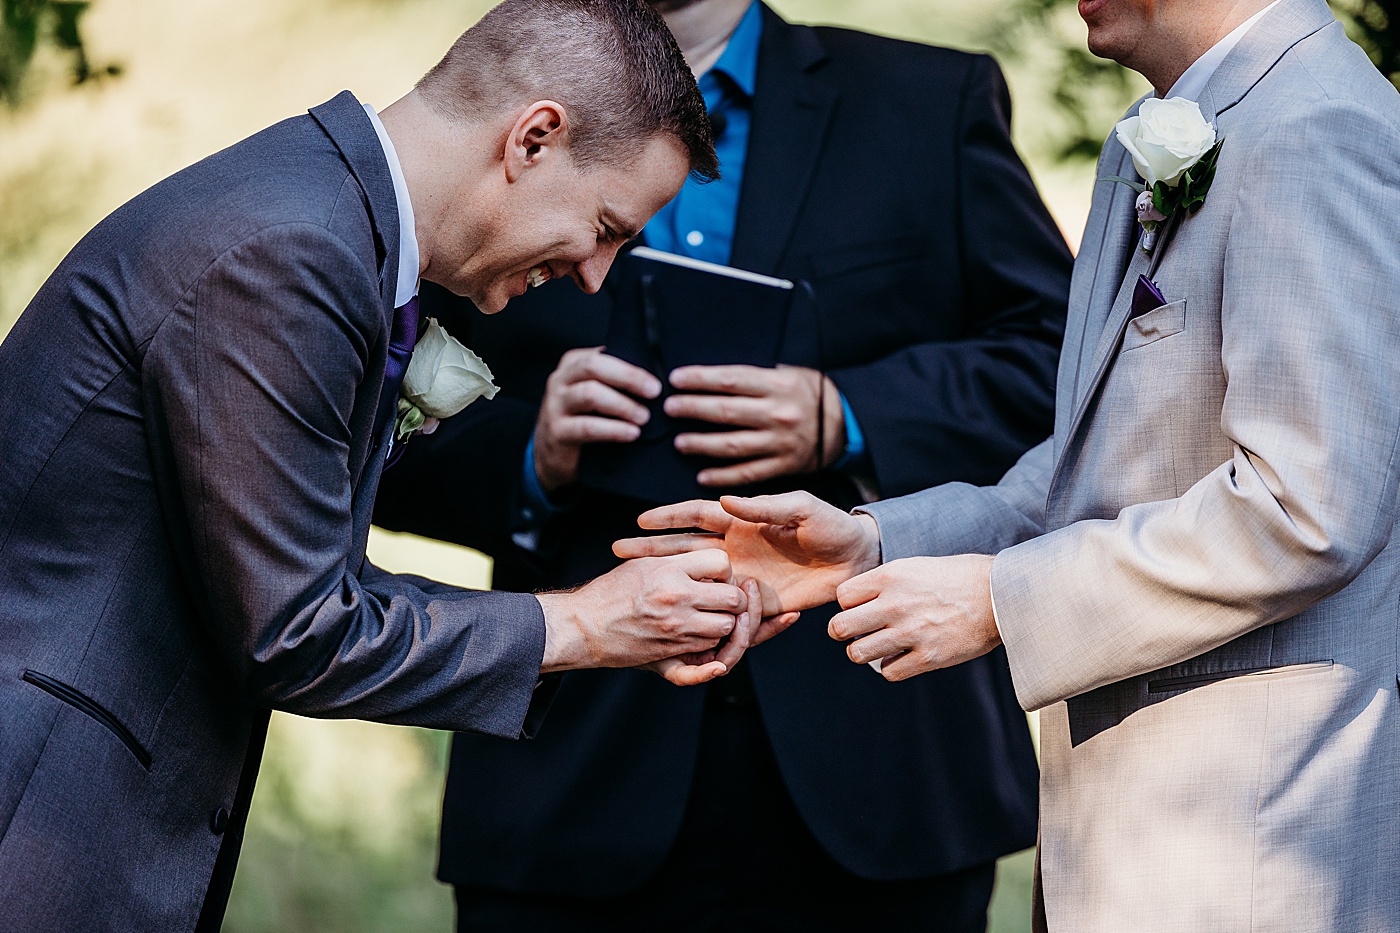 Groom laughing as he places wedding ring | Megan Montalvo Photography